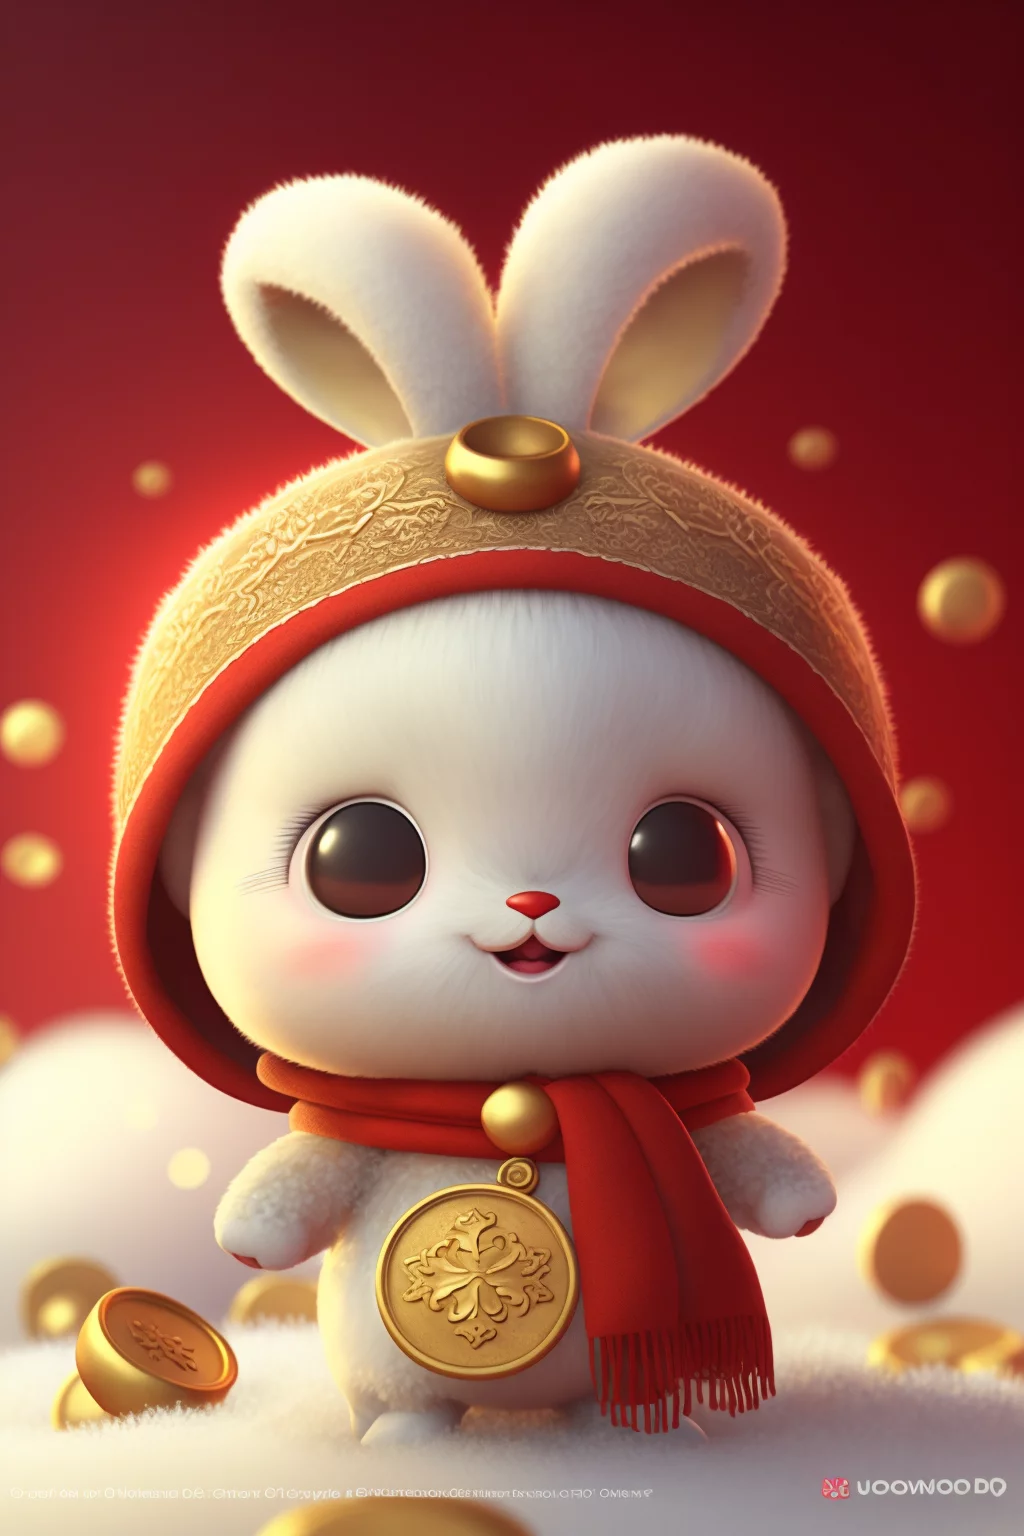 Bunny cub with gold coins in winter scene